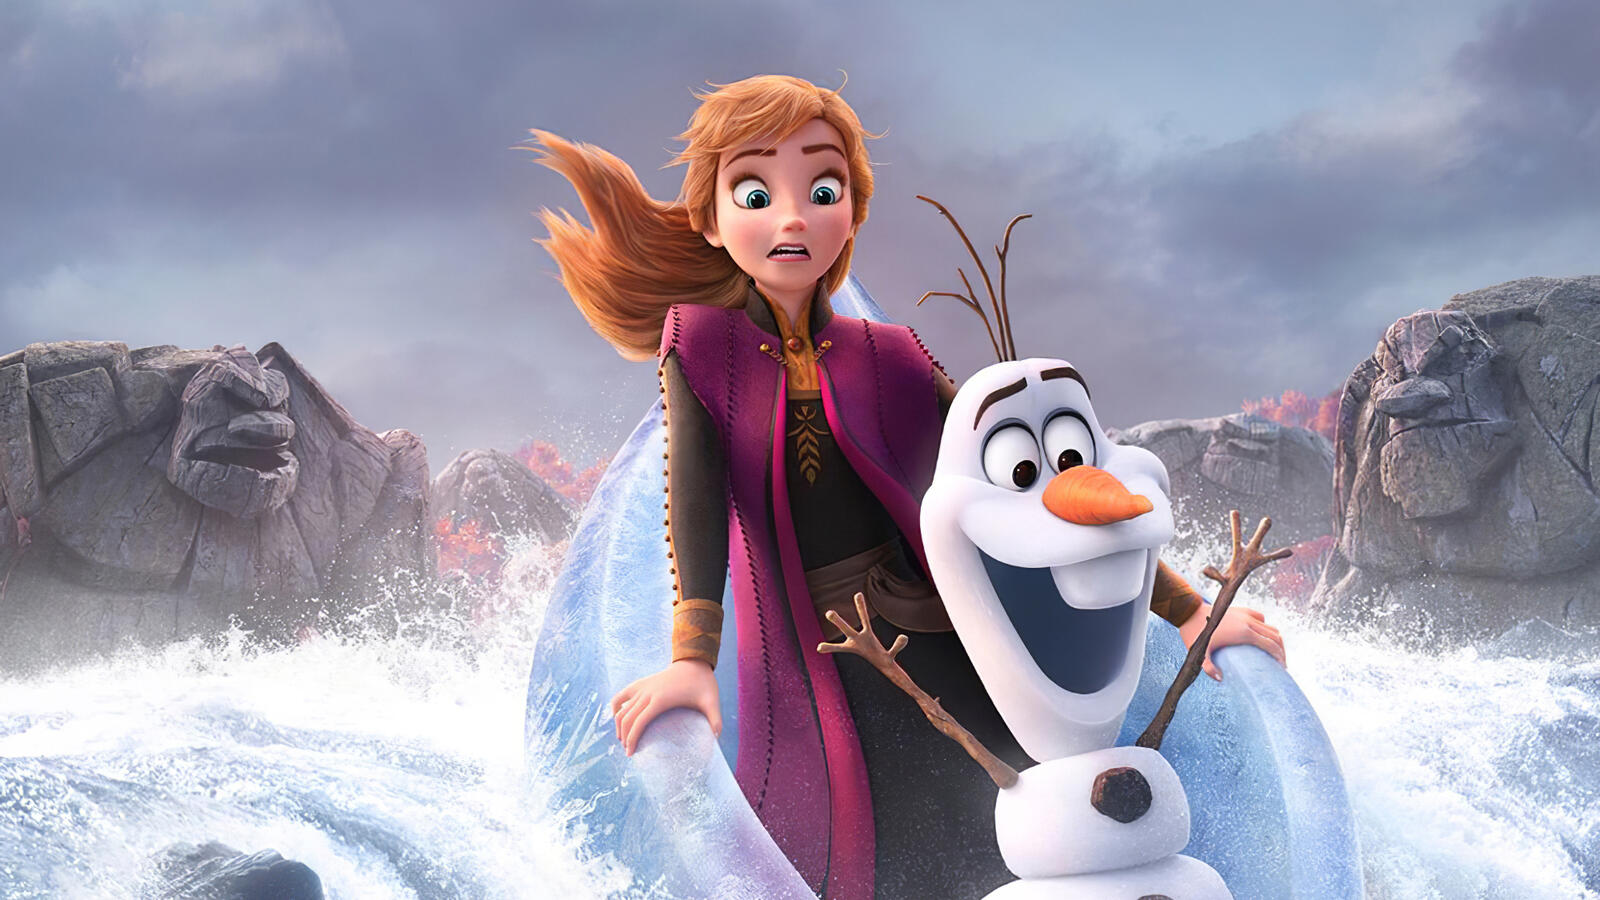 Wallpapers Frozen 2 movies 2019 Movies on the desktop